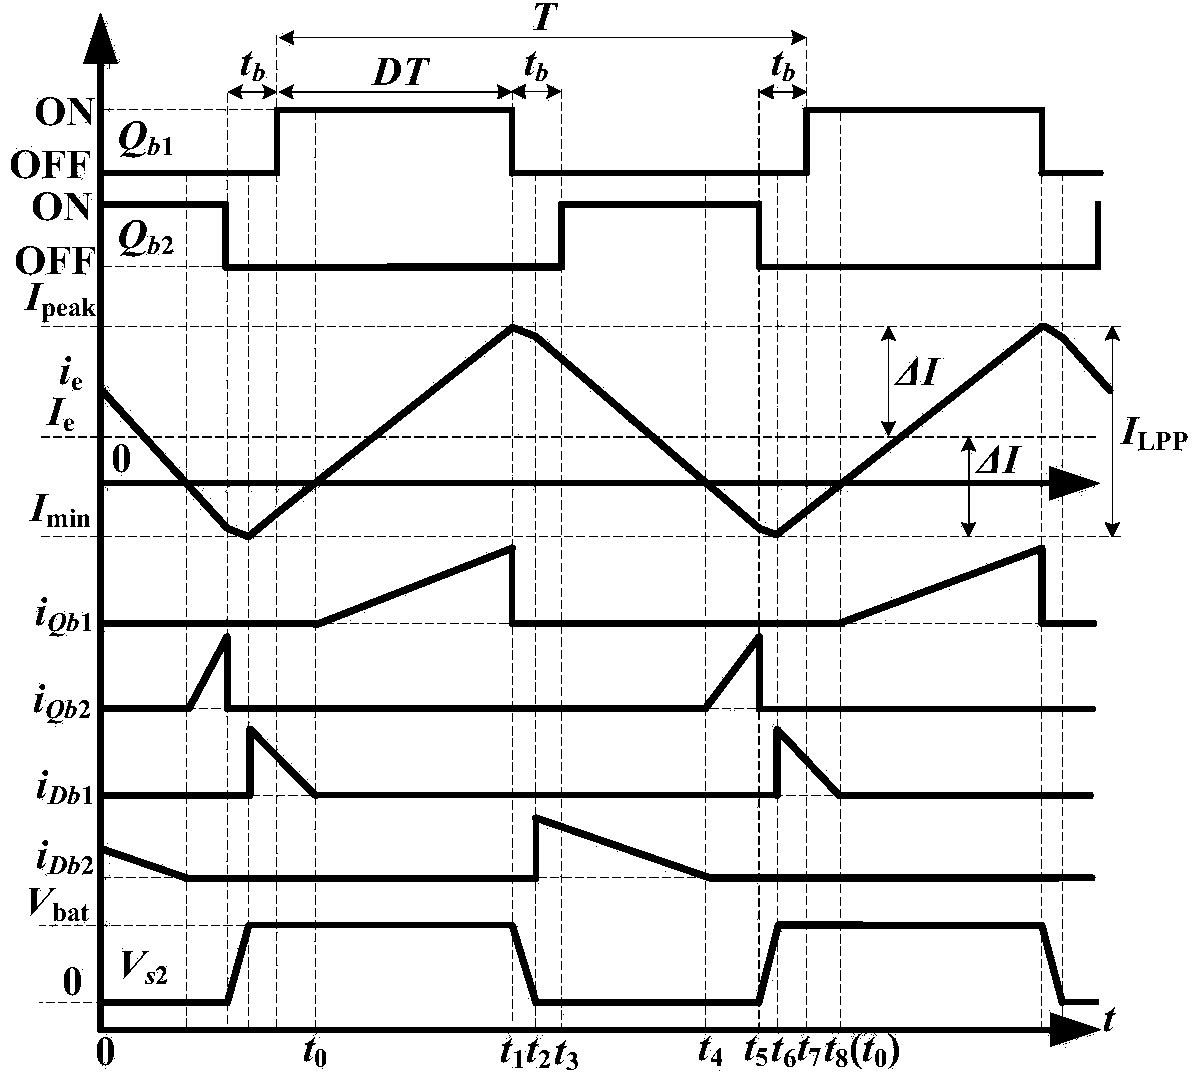 Equalization circuit based on Buck-Boost convertor and bidirectional LC (inductance capacitance) resonant convertor as well as implementation method